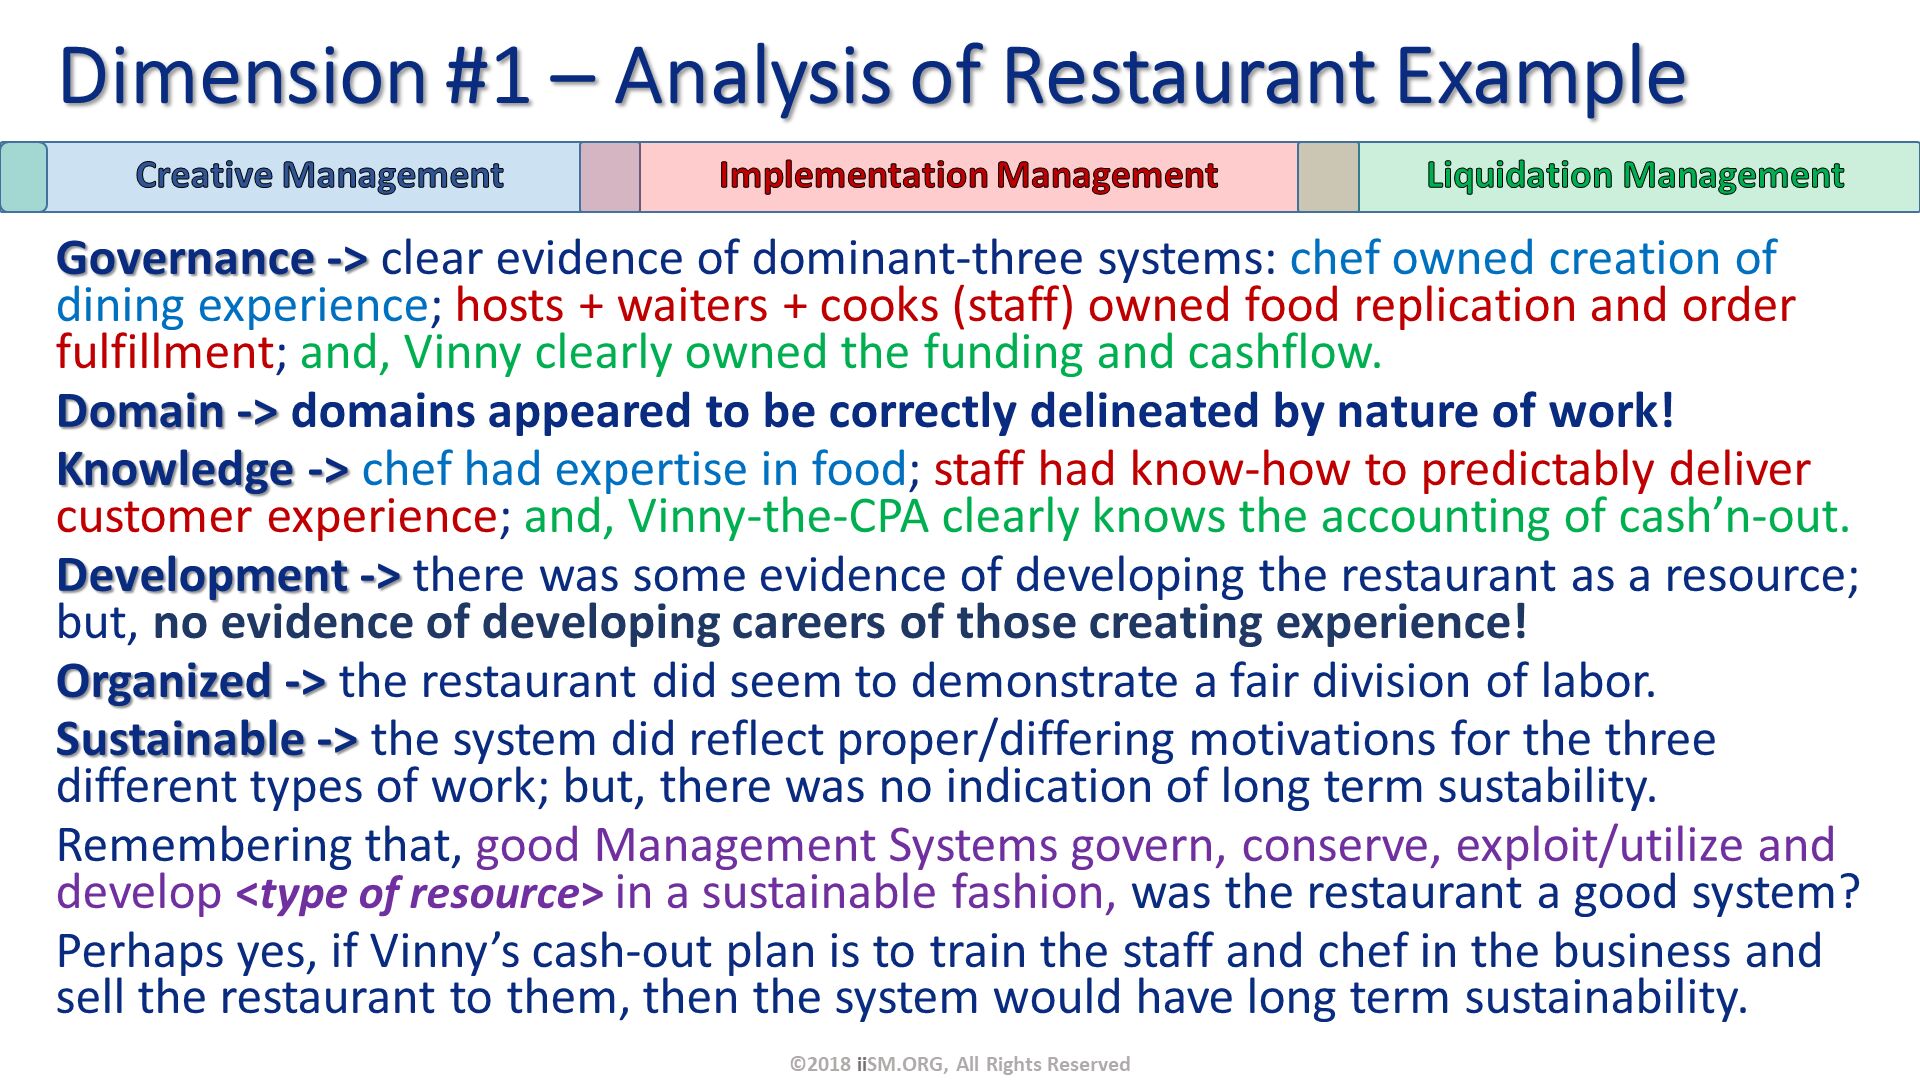 Governance -> clear evidence of dominant-three systems: chef owned creation of dining experience; hosts + waiters + cooks (staff) owned food replication and order fulfillment; and, Vinny clearly owned the funding and cashflow.
Domain -> domains appeared to be correctly delineated by nature of work! 
Knowledge -> chef had expertise in food; staff had know-how to predictably deliver customer experience; and, Vinny-the-CPA clearly knows the accounting of cash’n-out.
Development -> there was some evidence of developing the restaurant as a resource; but, no evidence of developing careers of those creating experience!
Organized -> the restaurant did seem to demonstrate a fair division of labor.
Sustainable -> the system did reflect proper/differing motivations for the three different types of work; but, there was no indication of long term sustability.  
Remembering that, good Management Systems govern, conserve, exploit/utilize and develop <type of resource> in a sustainable fashion, was the restaurant a good system?
Perhaps yes, if Vinny’s cash-out plan is to train the staff and chef in the business and sell the restaurant to them, then the system would have long term sustainability. Dimension #1 – Analysis of Restaurant Example. ©2018 iiSM.ORG, All Rights Reserved. 